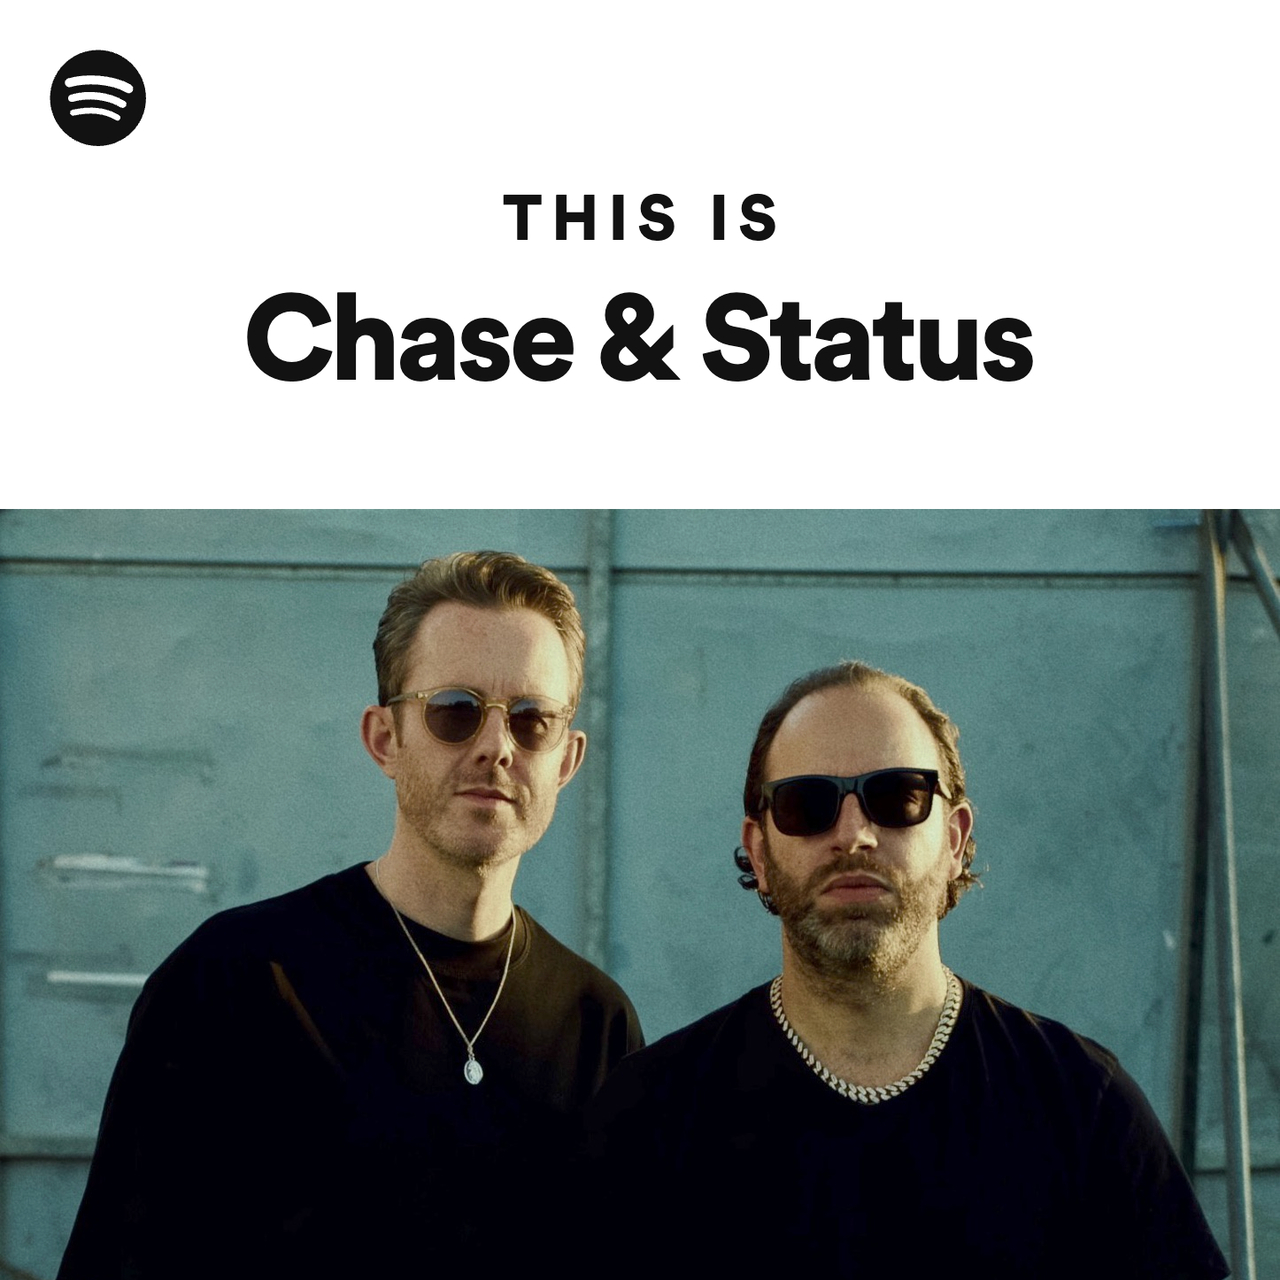 This Is Chase & Status